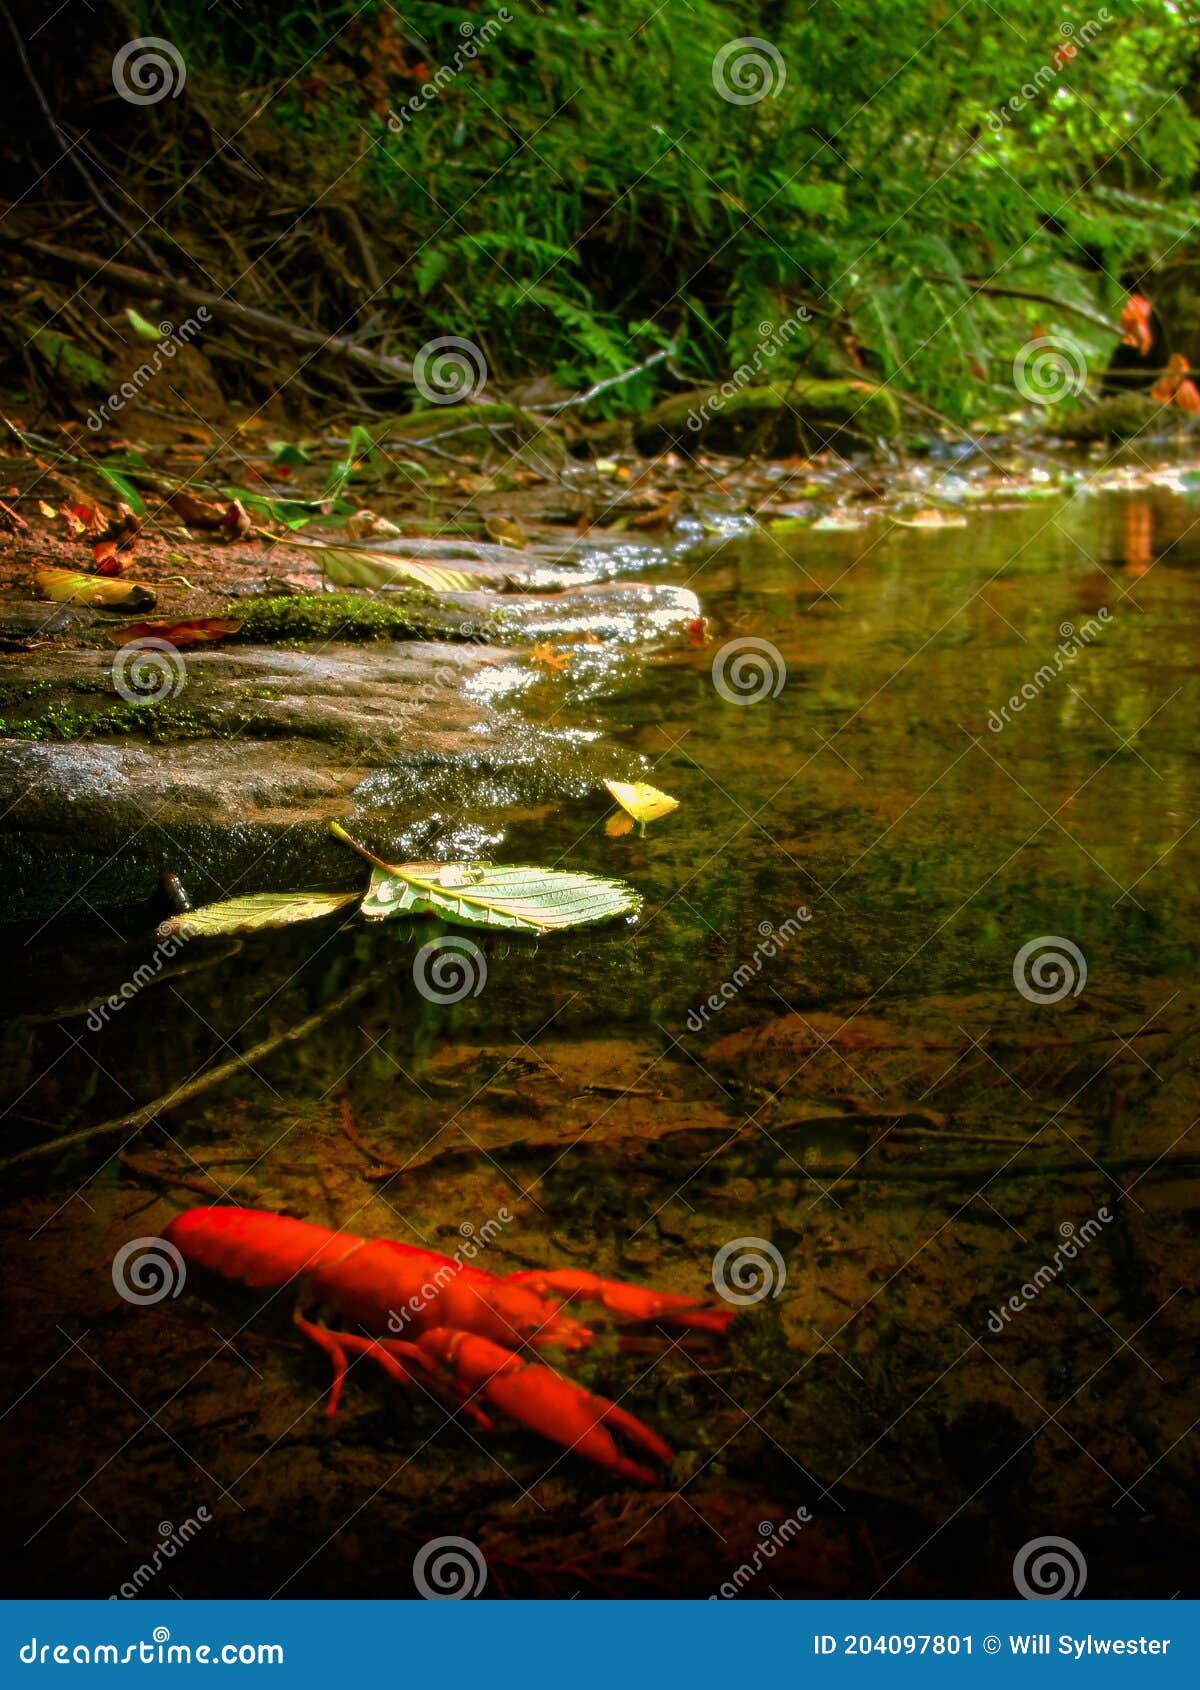 Bright Red Crawdad In The Smith River Siuslaw National Forest Oregon